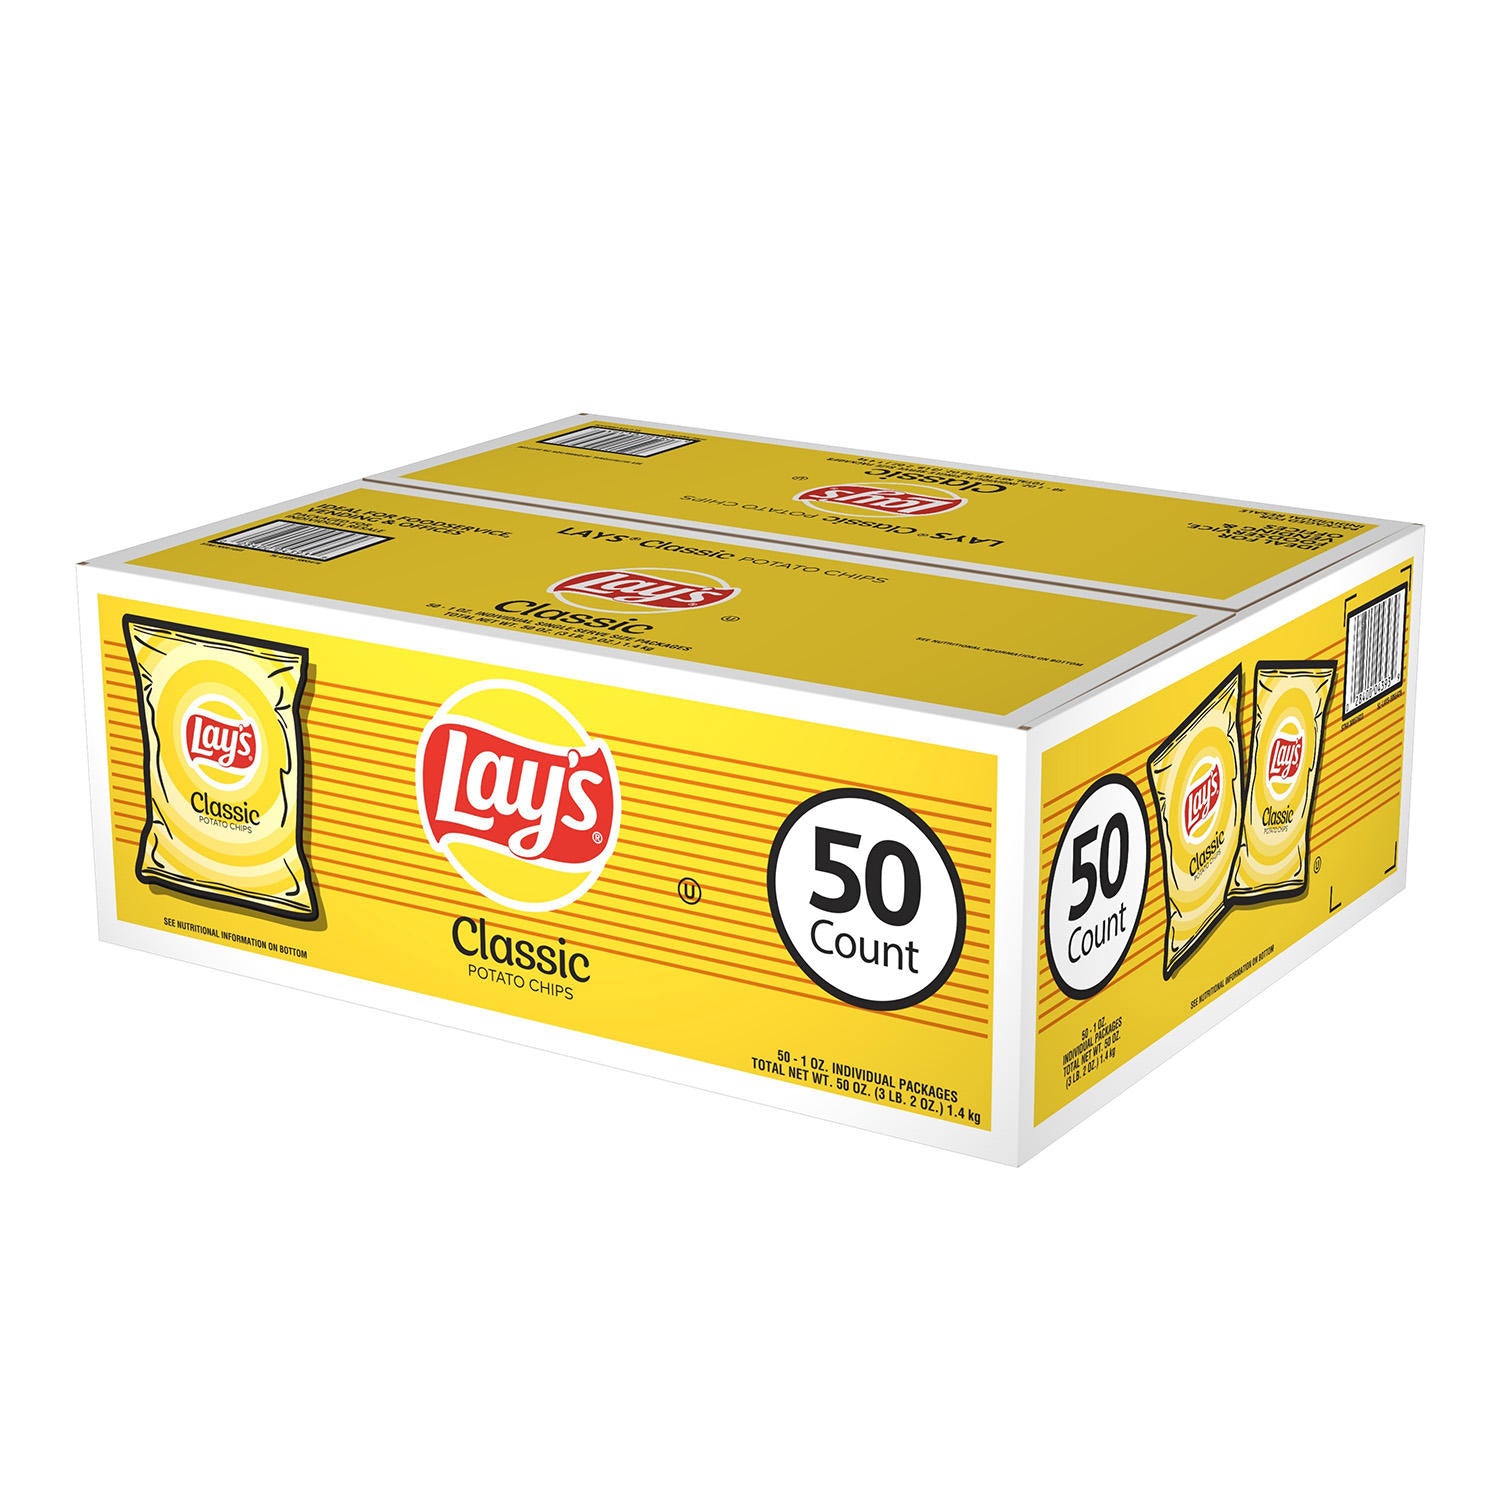 Lays Classic Single Size Chips, 50 Ct